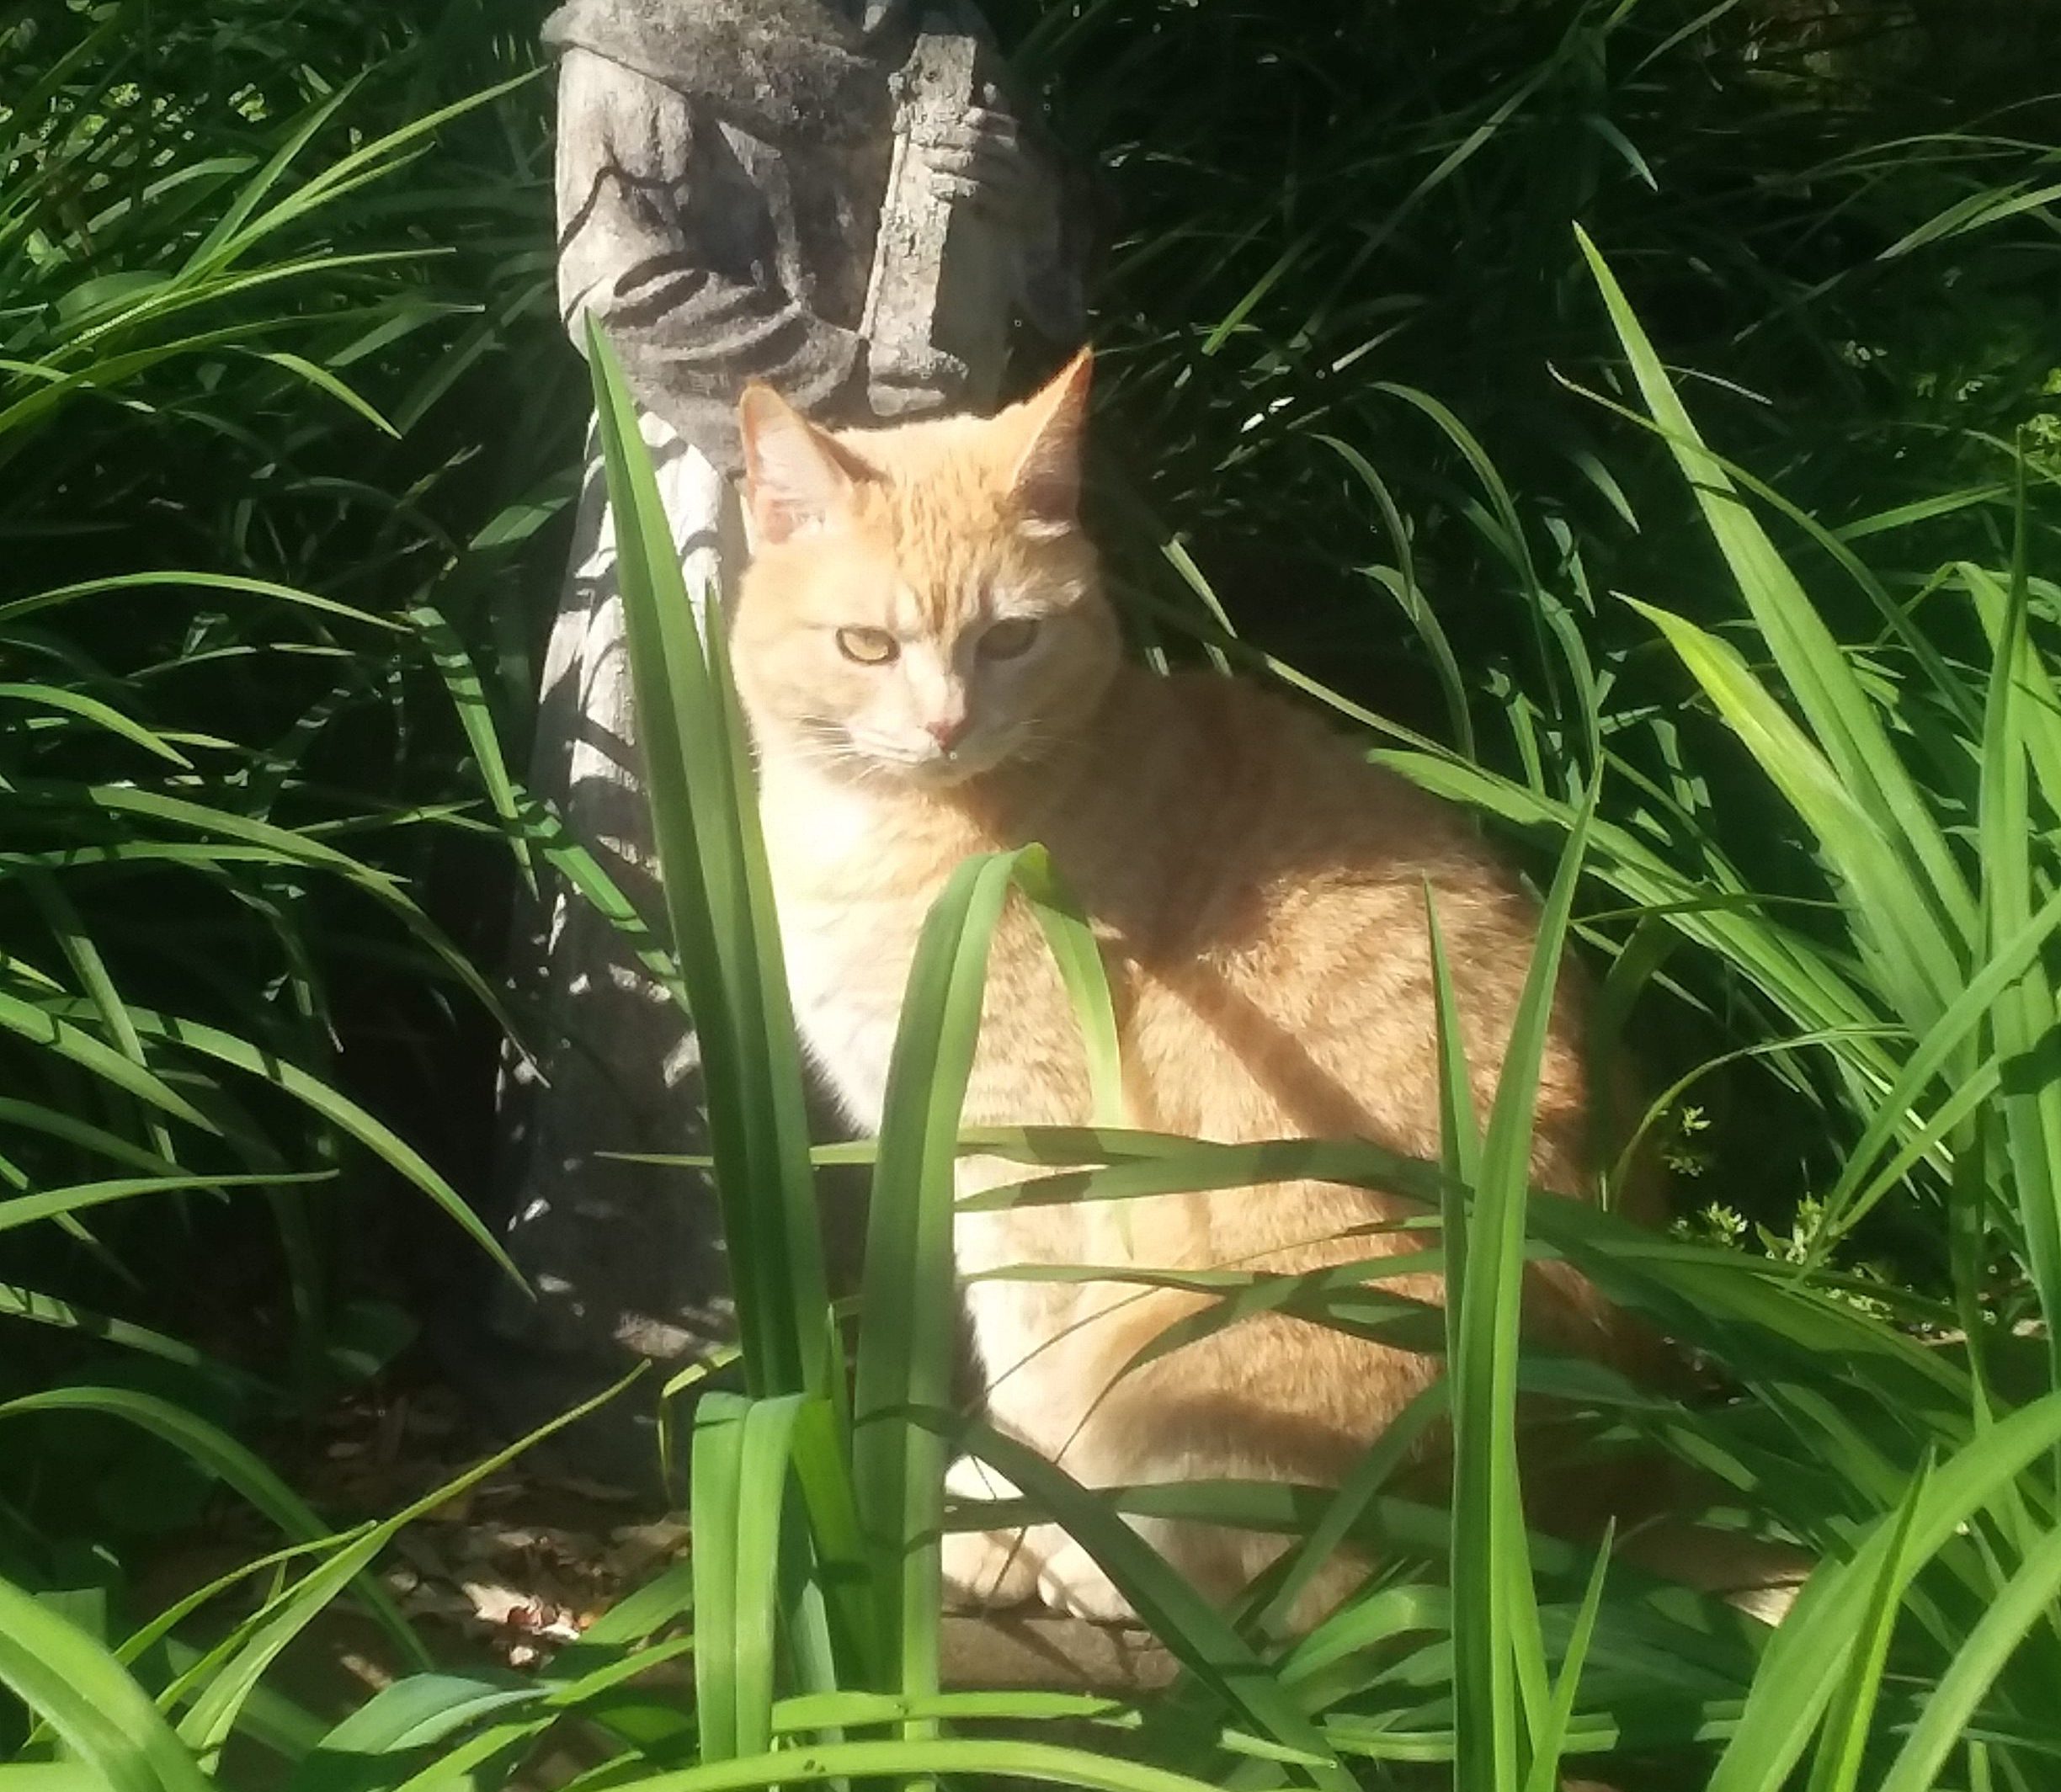 Lost pet: Cat missing from Blount County home